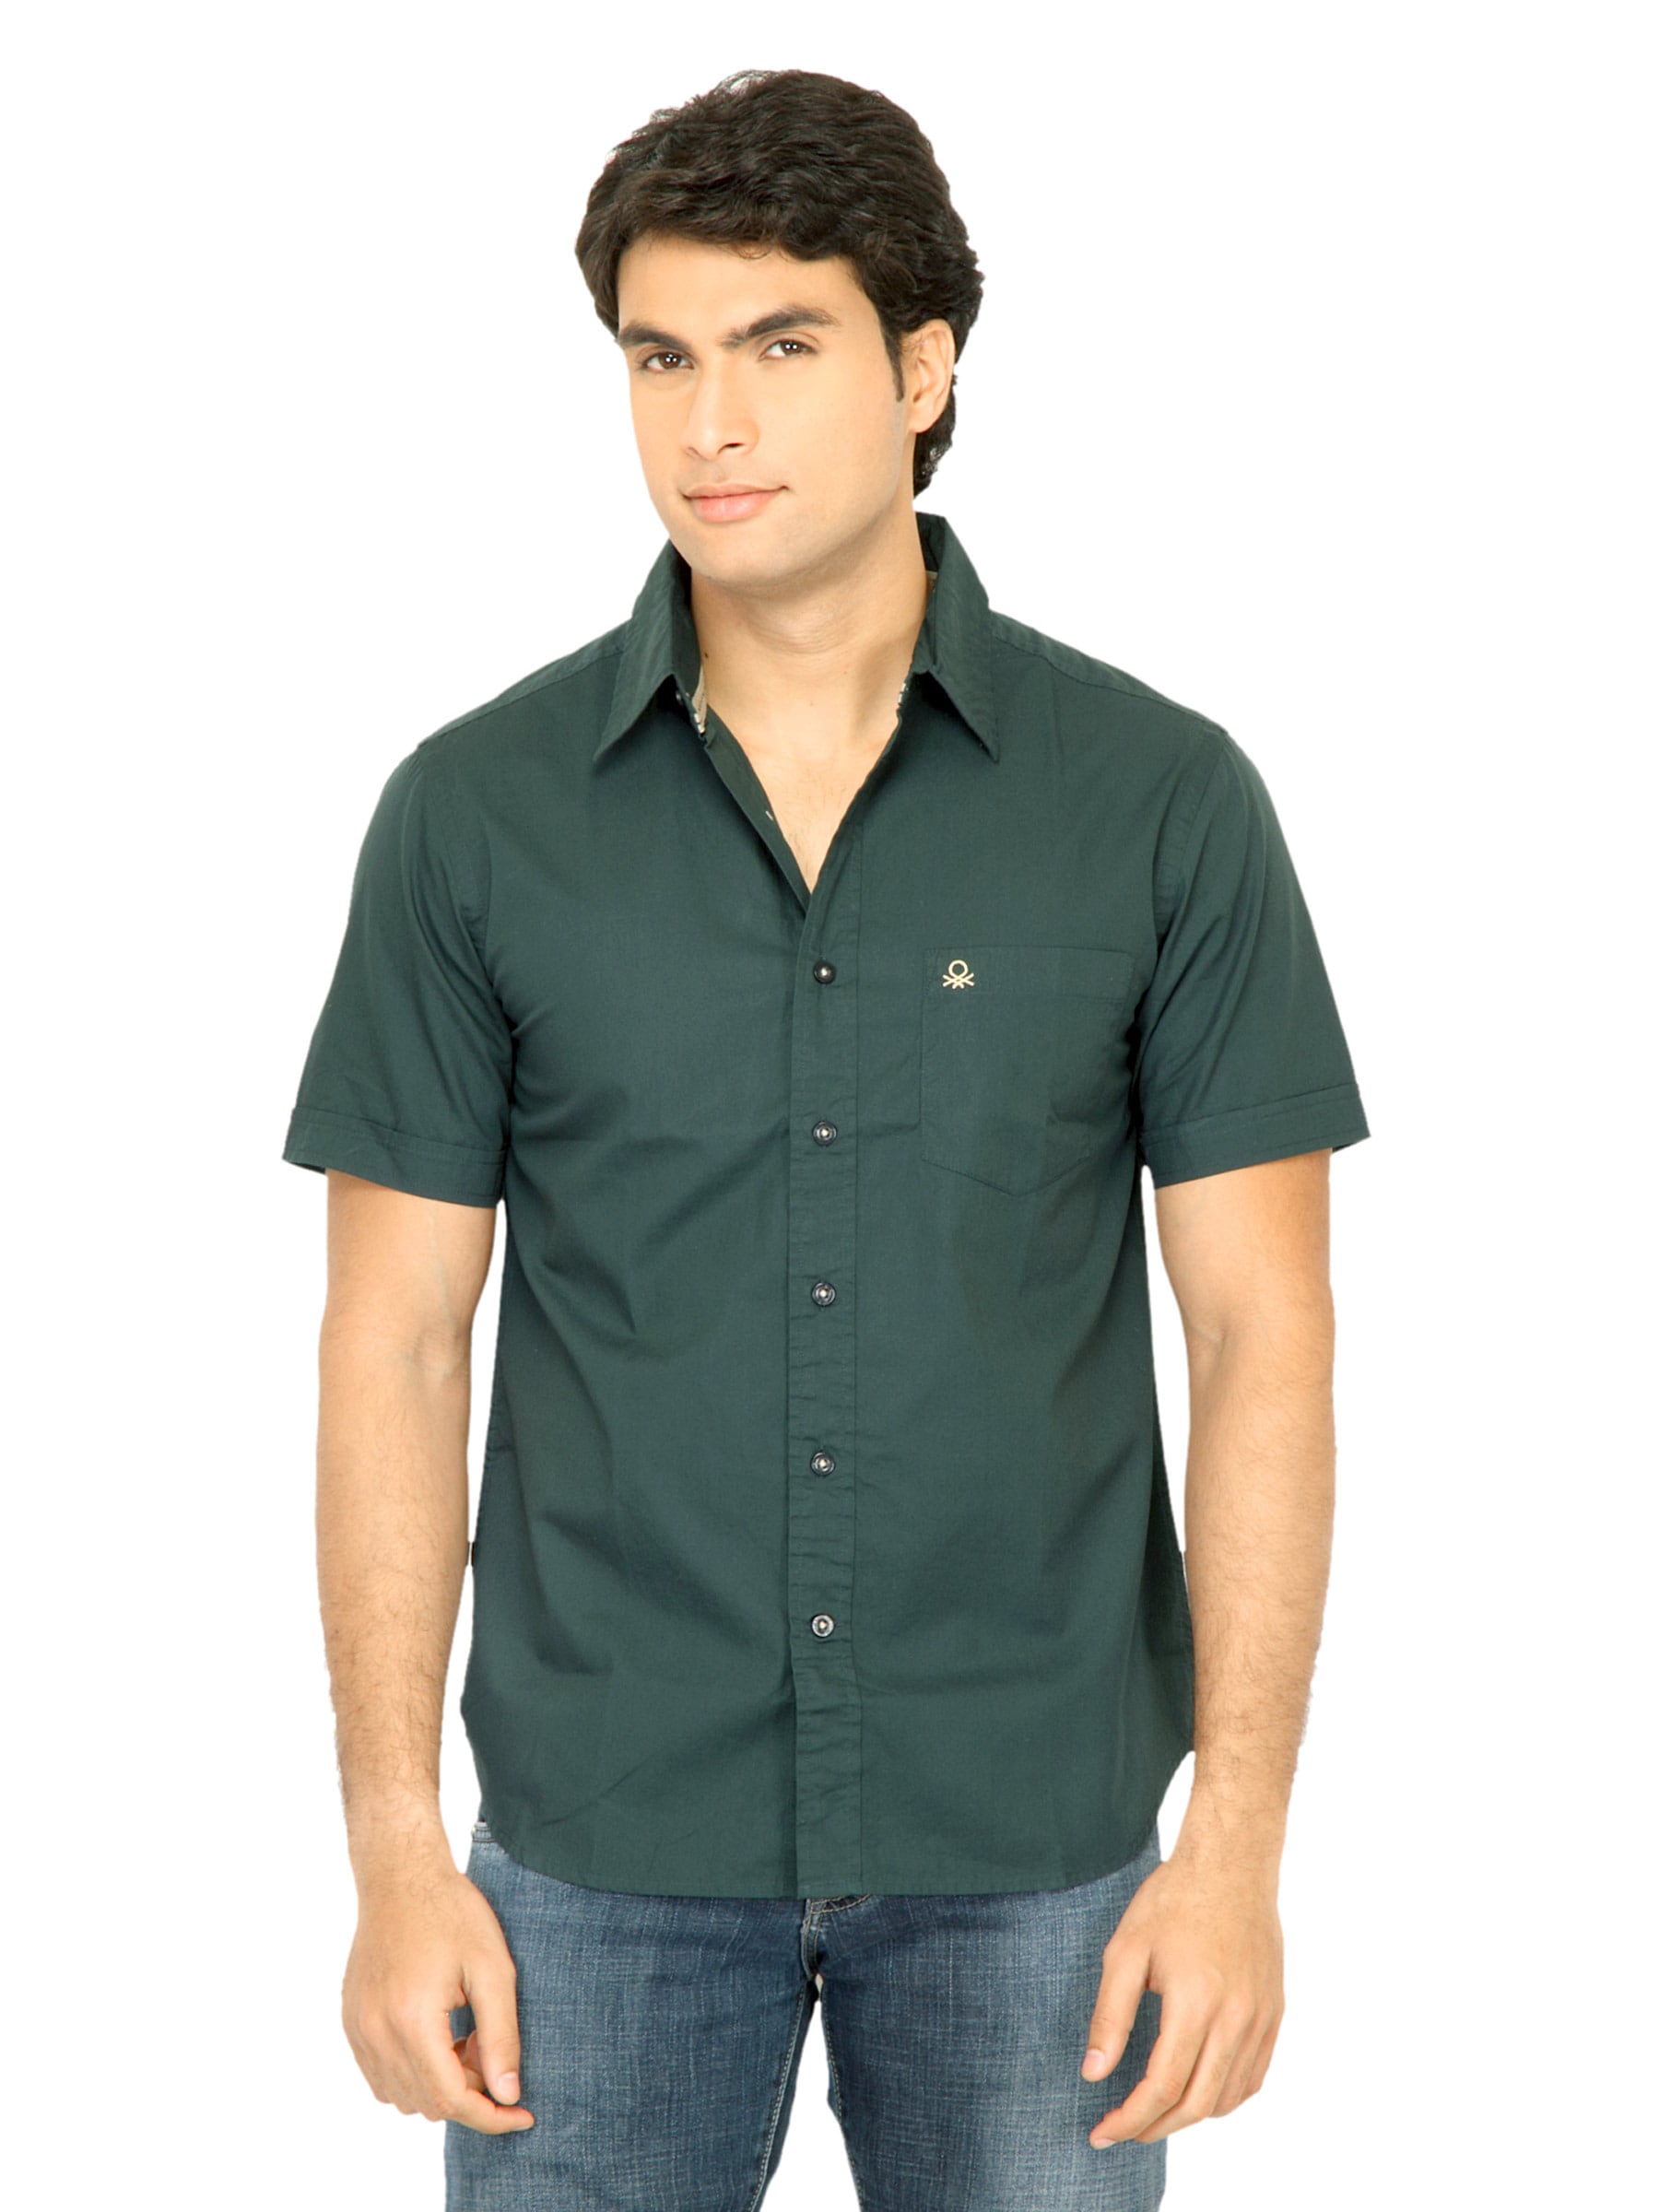 United Colors of Benetton Men Solid Green Shirt